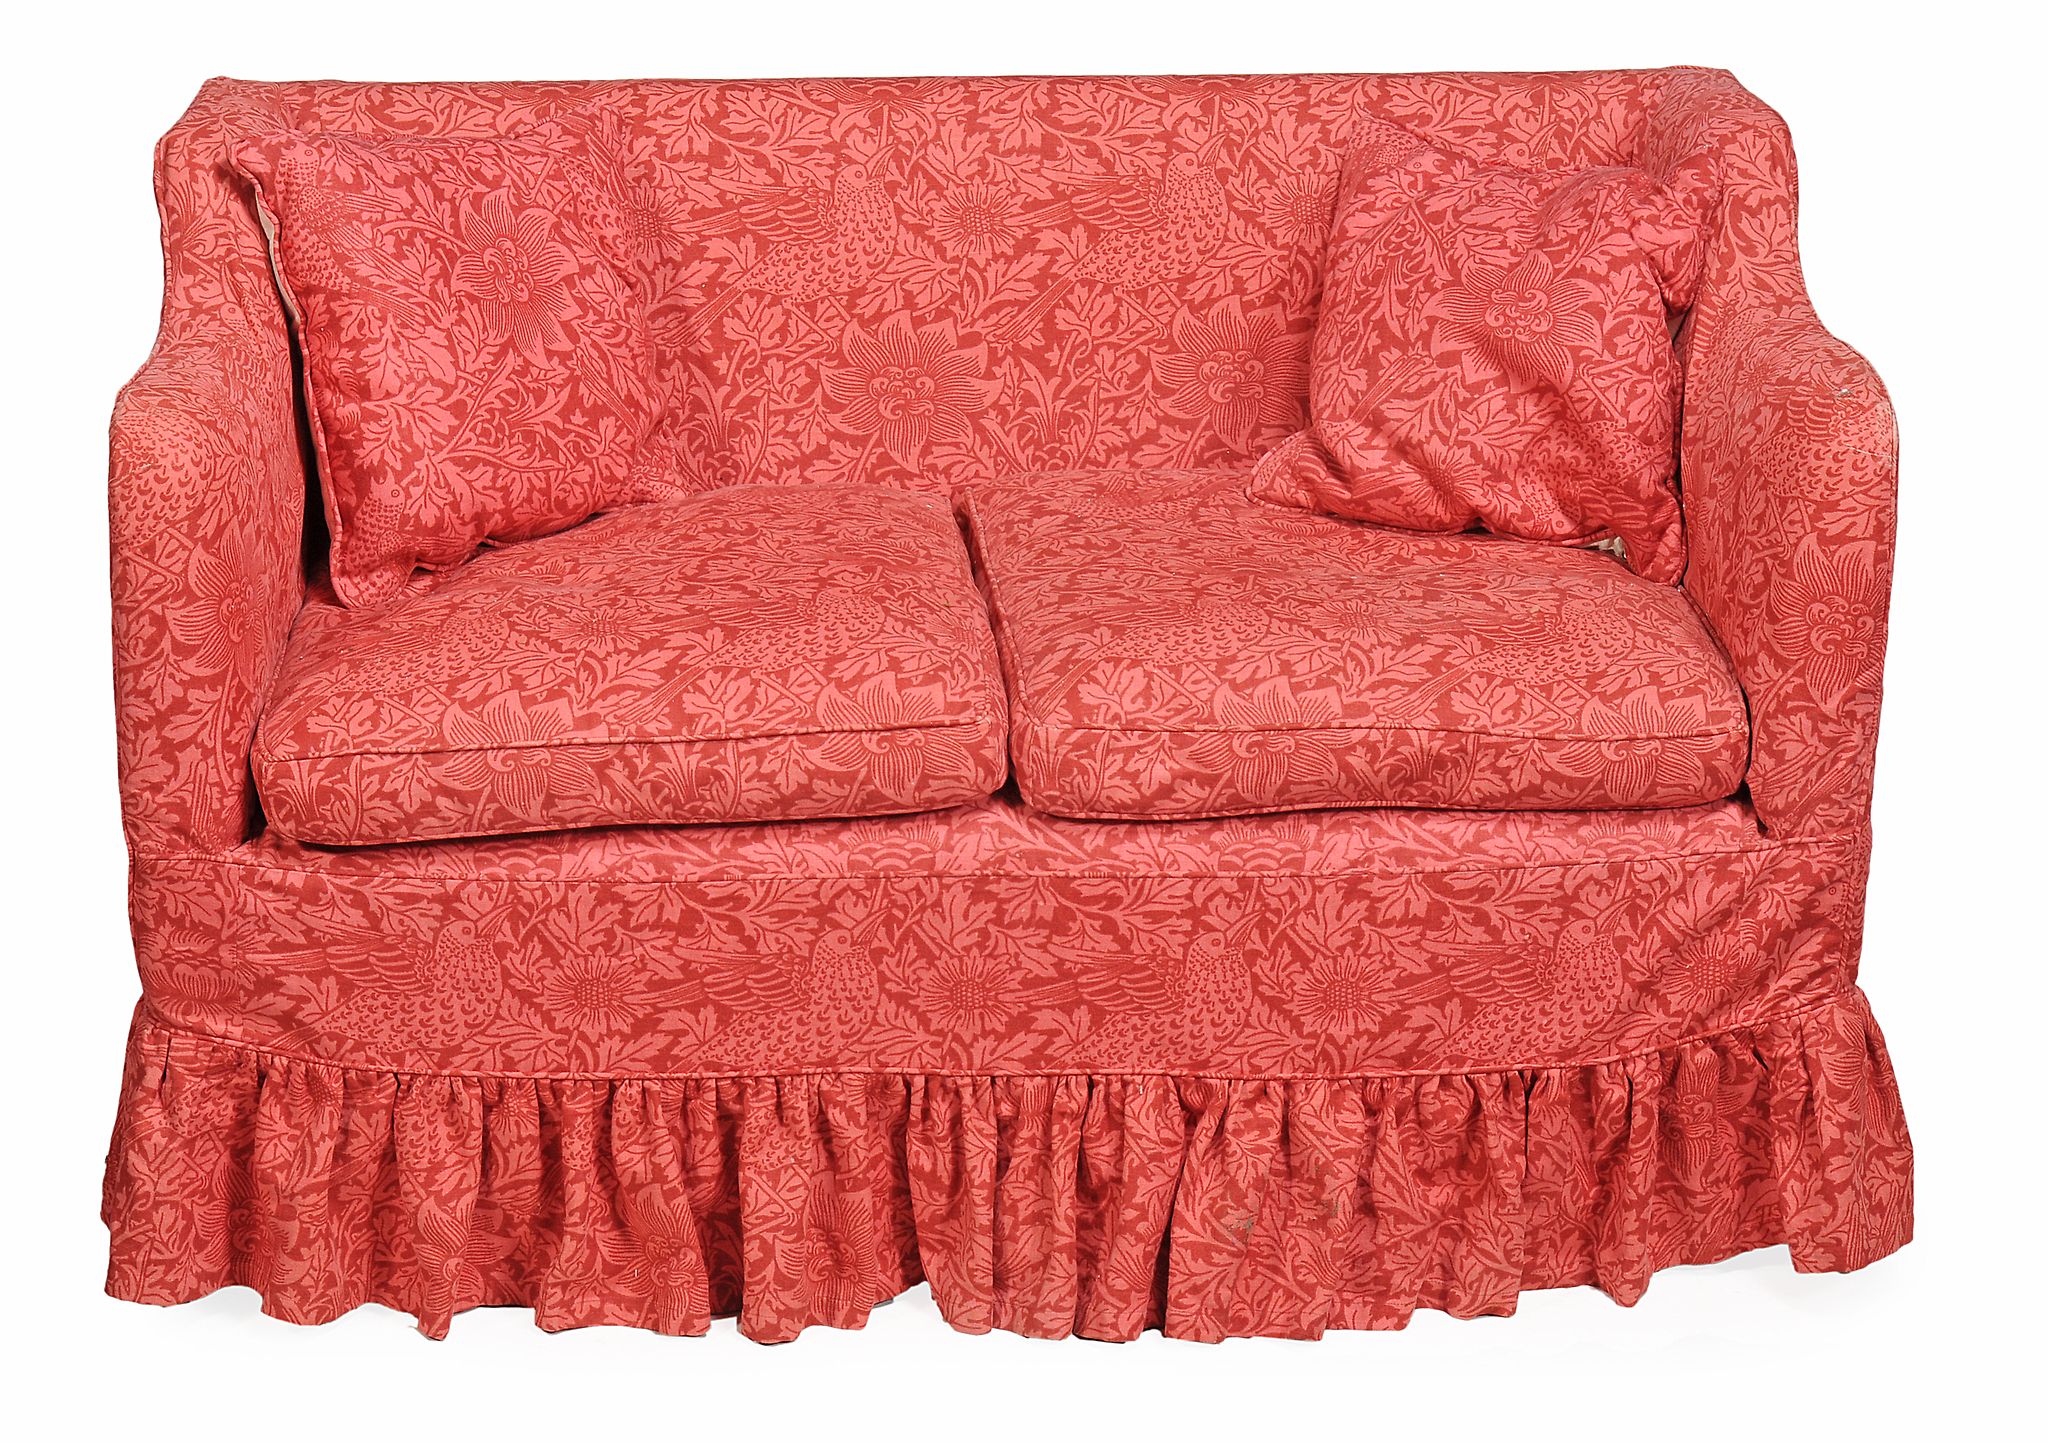 A Regency mahogany settee  , circa 1815,  with a stuffed back, winged arms and two seat squabs, on